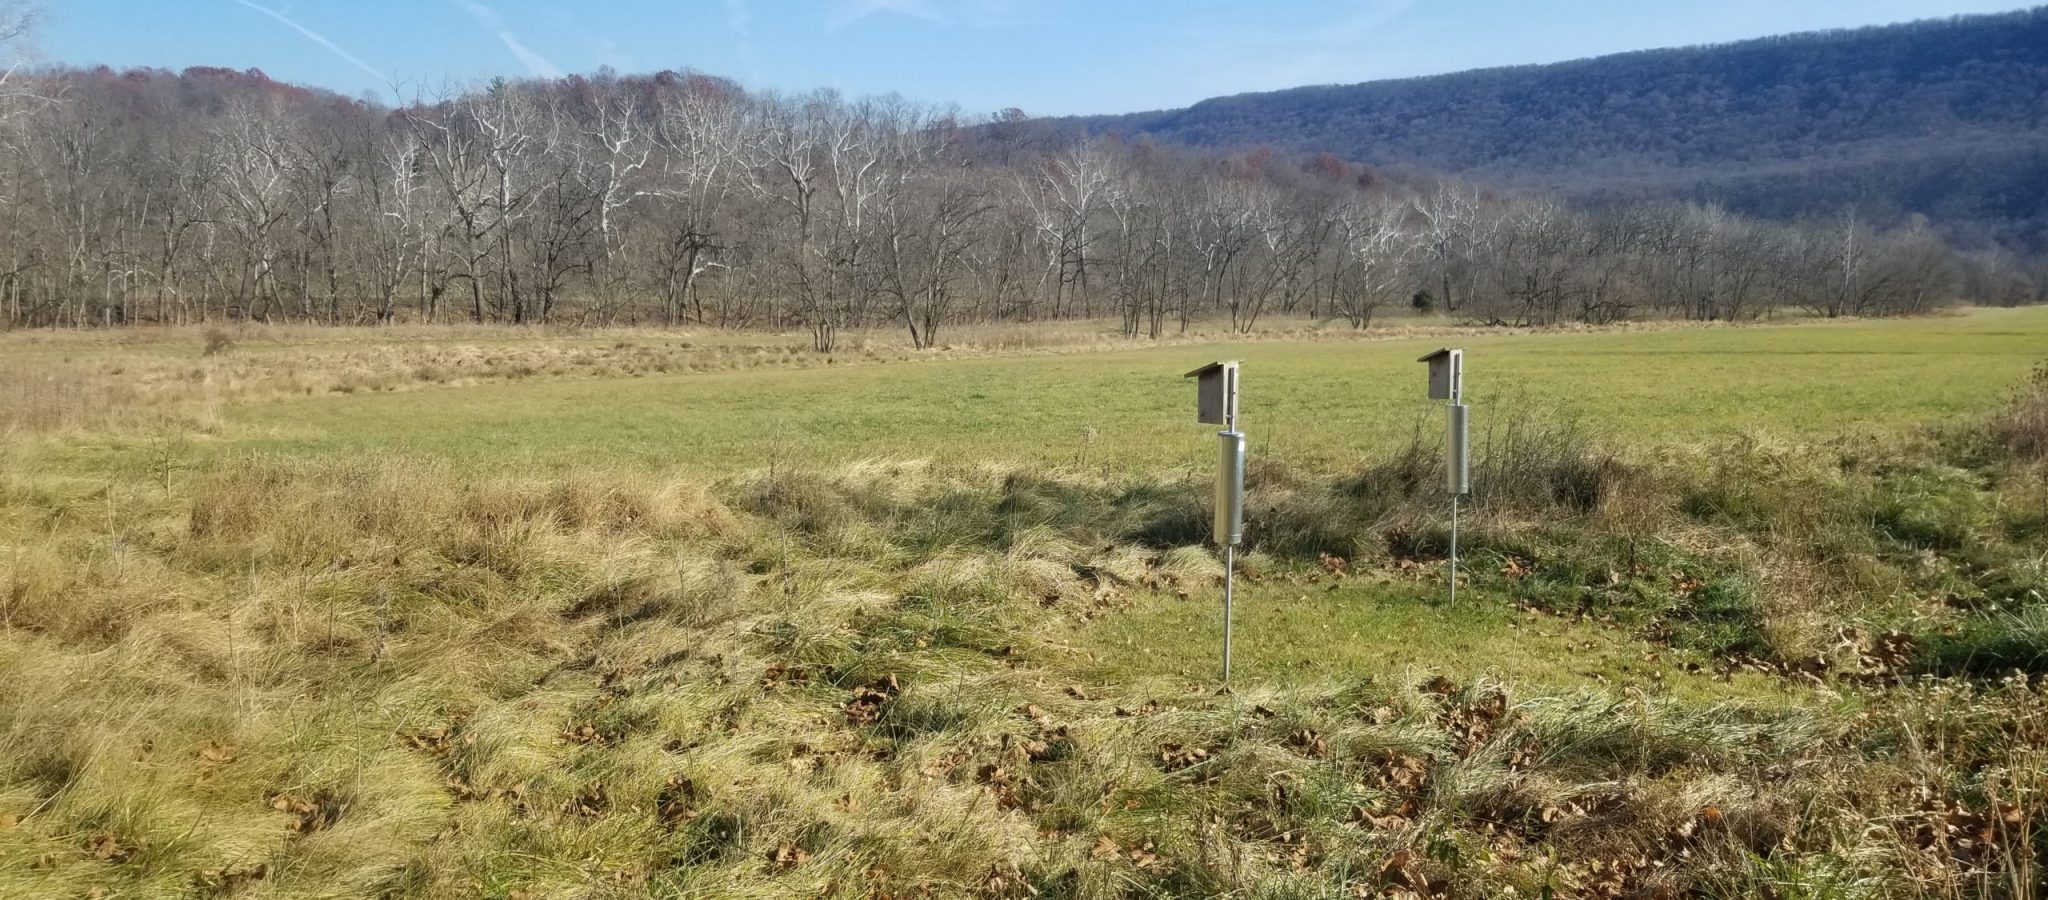 two wooden blue bird boxes in a field